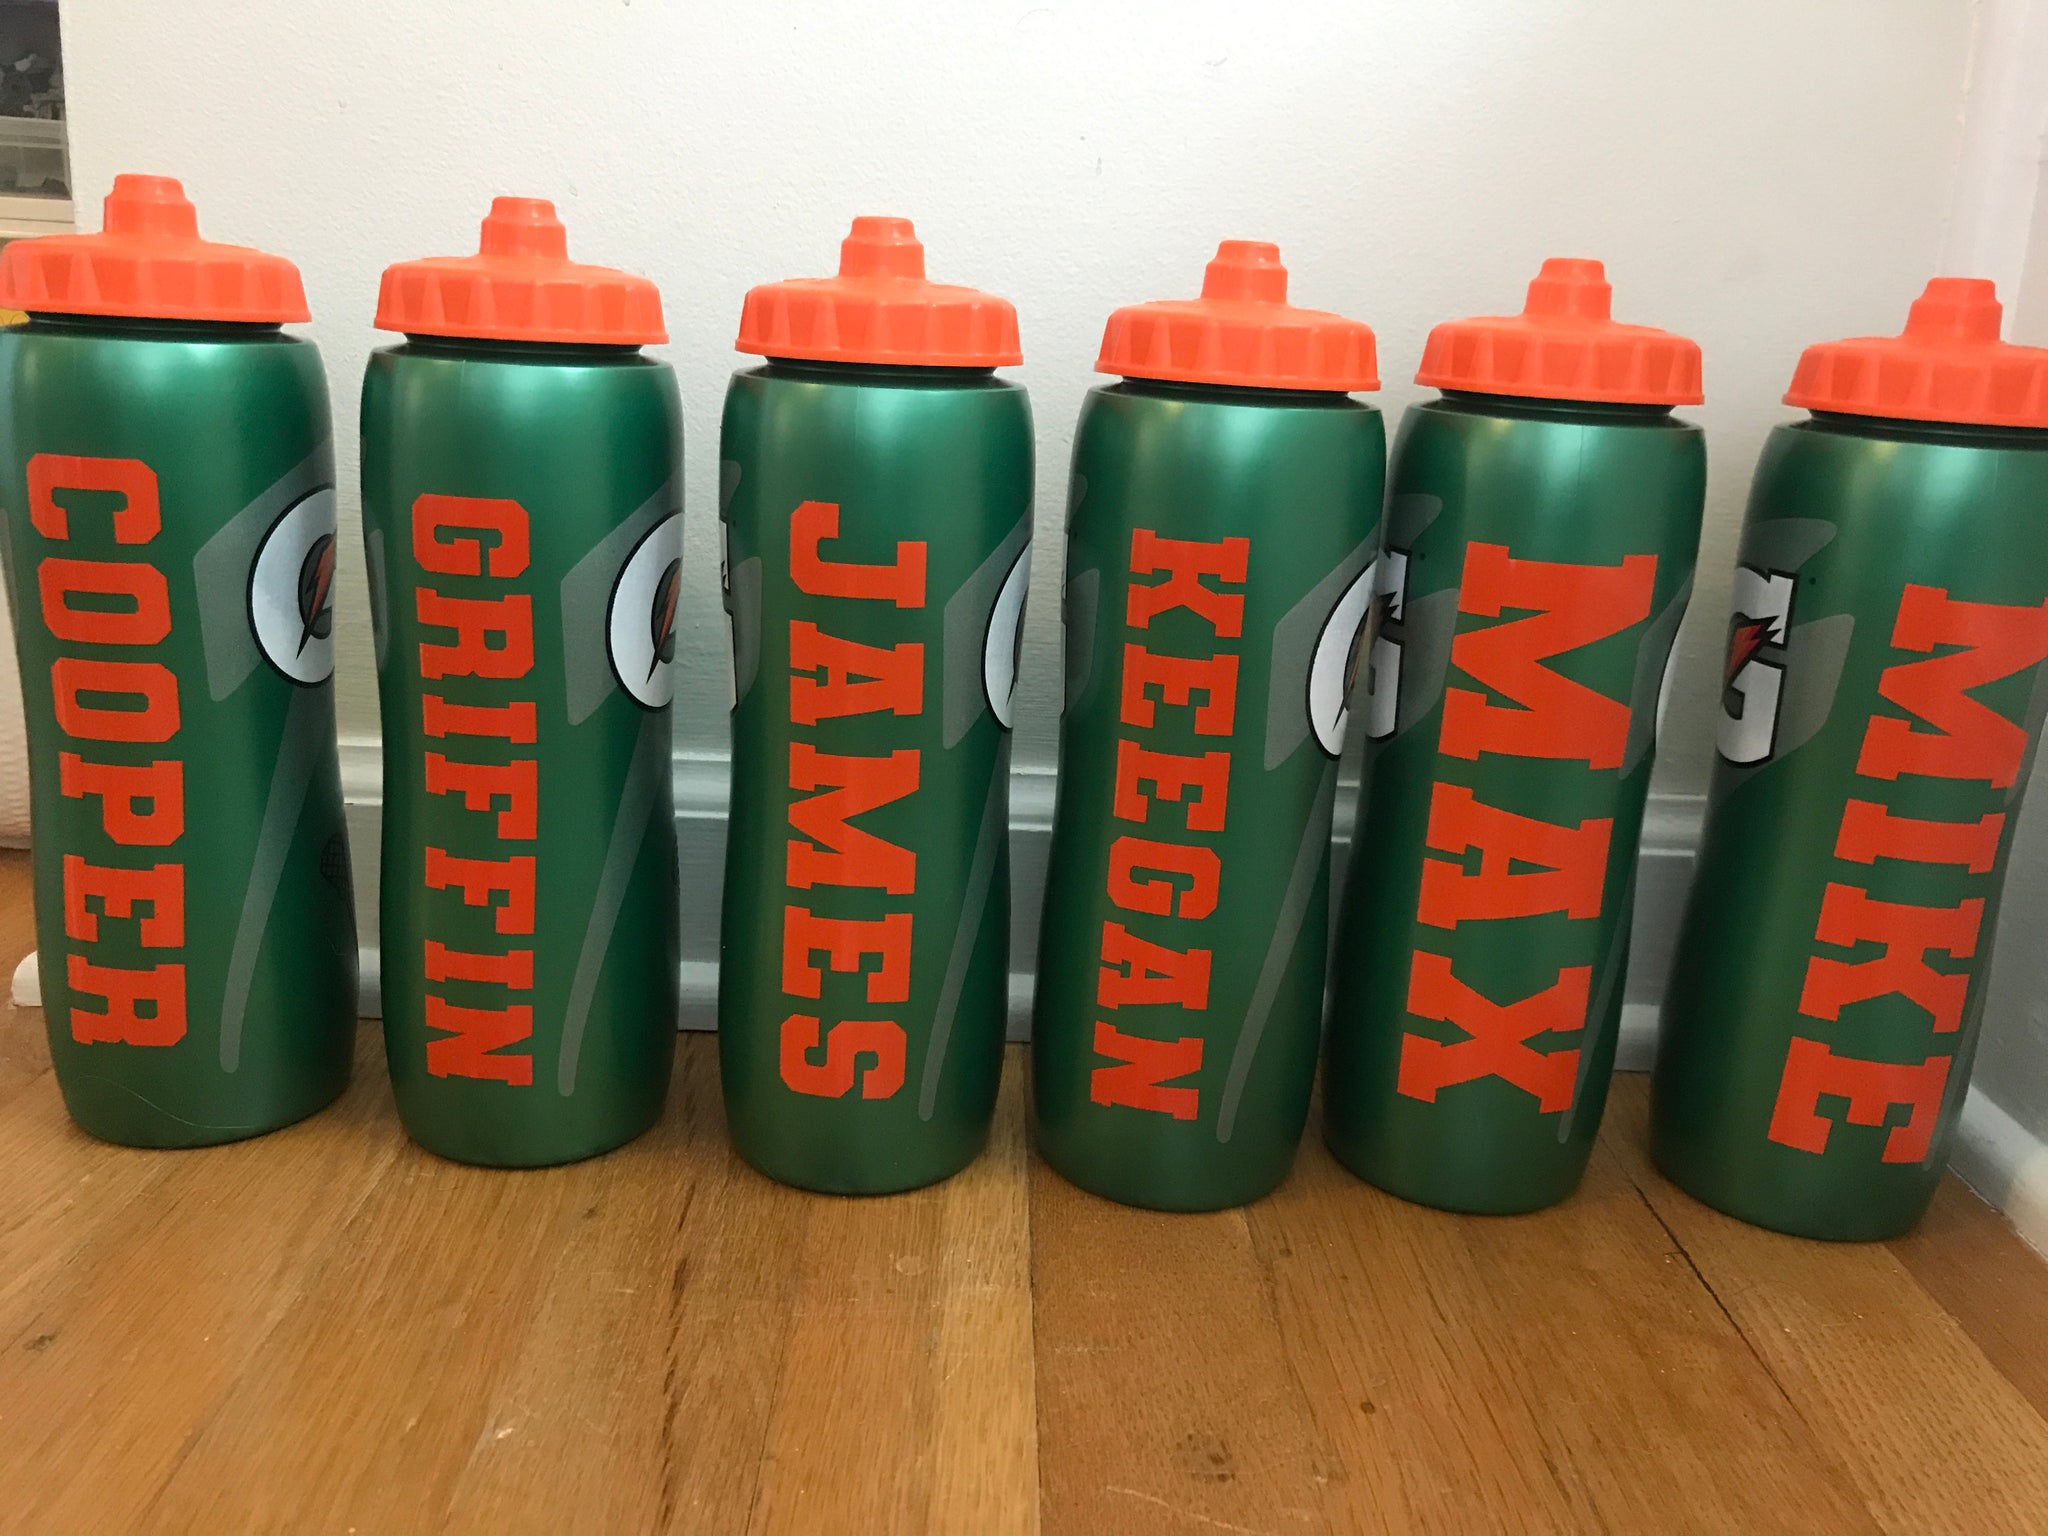 LABEL for Gatorade Water Bottle – Everything Labeled